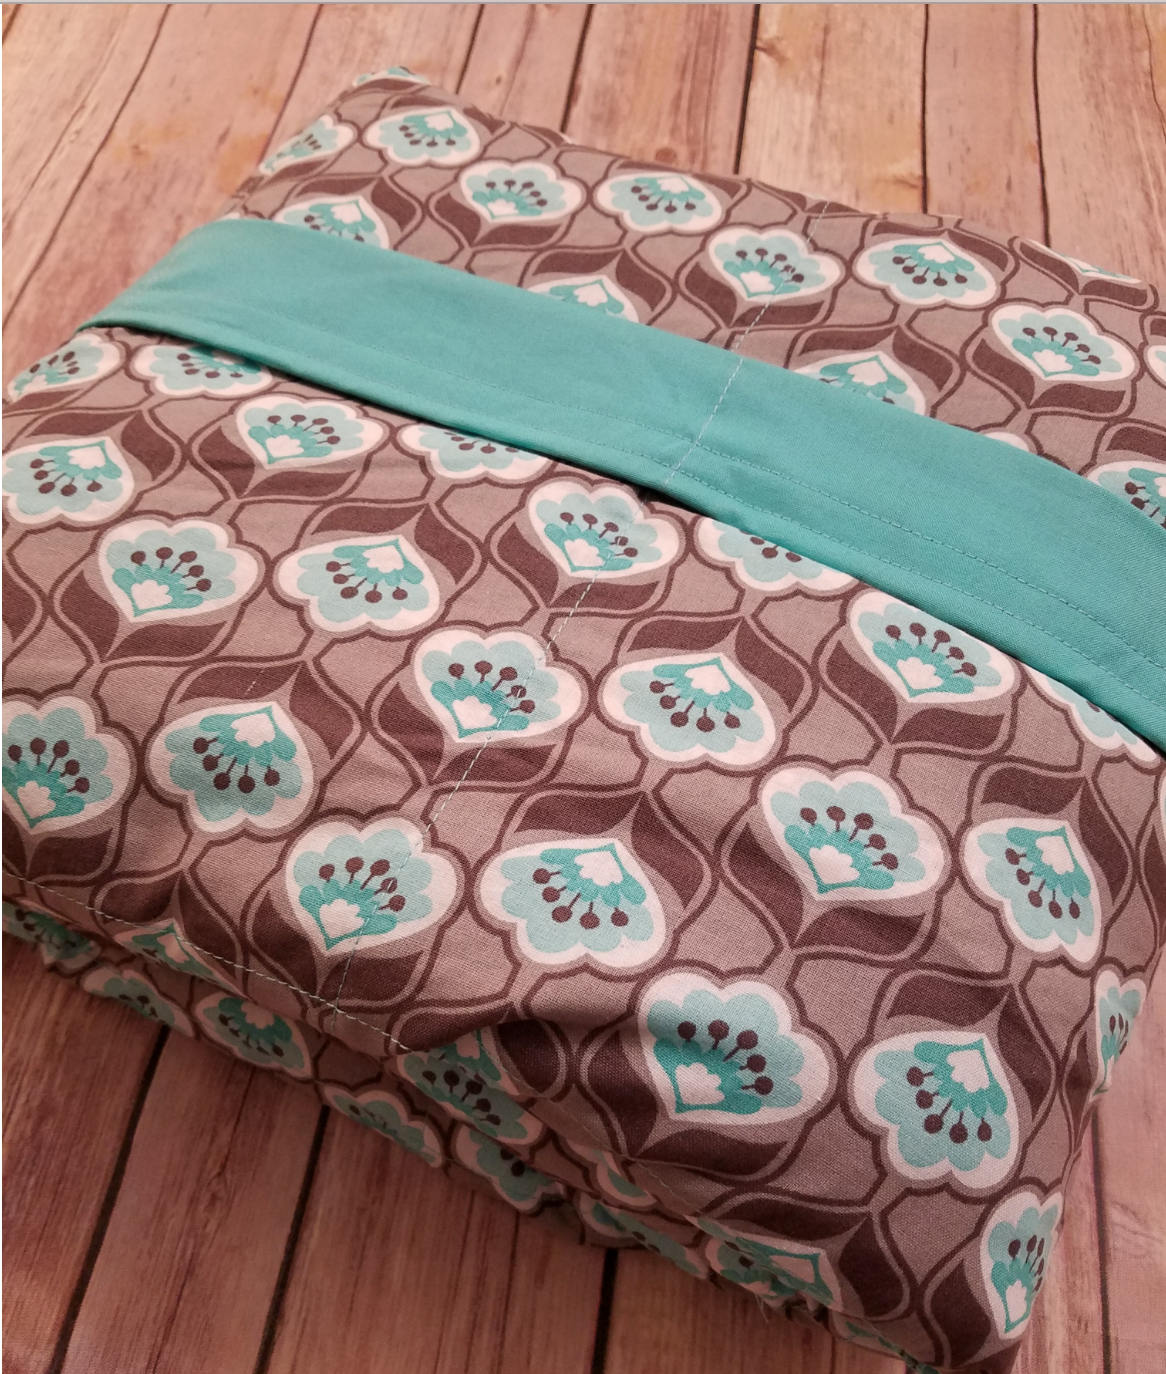 Weighted Blanket, 20 Pound, Gray and Teal, 40x70, READY TO SHIP, Twin